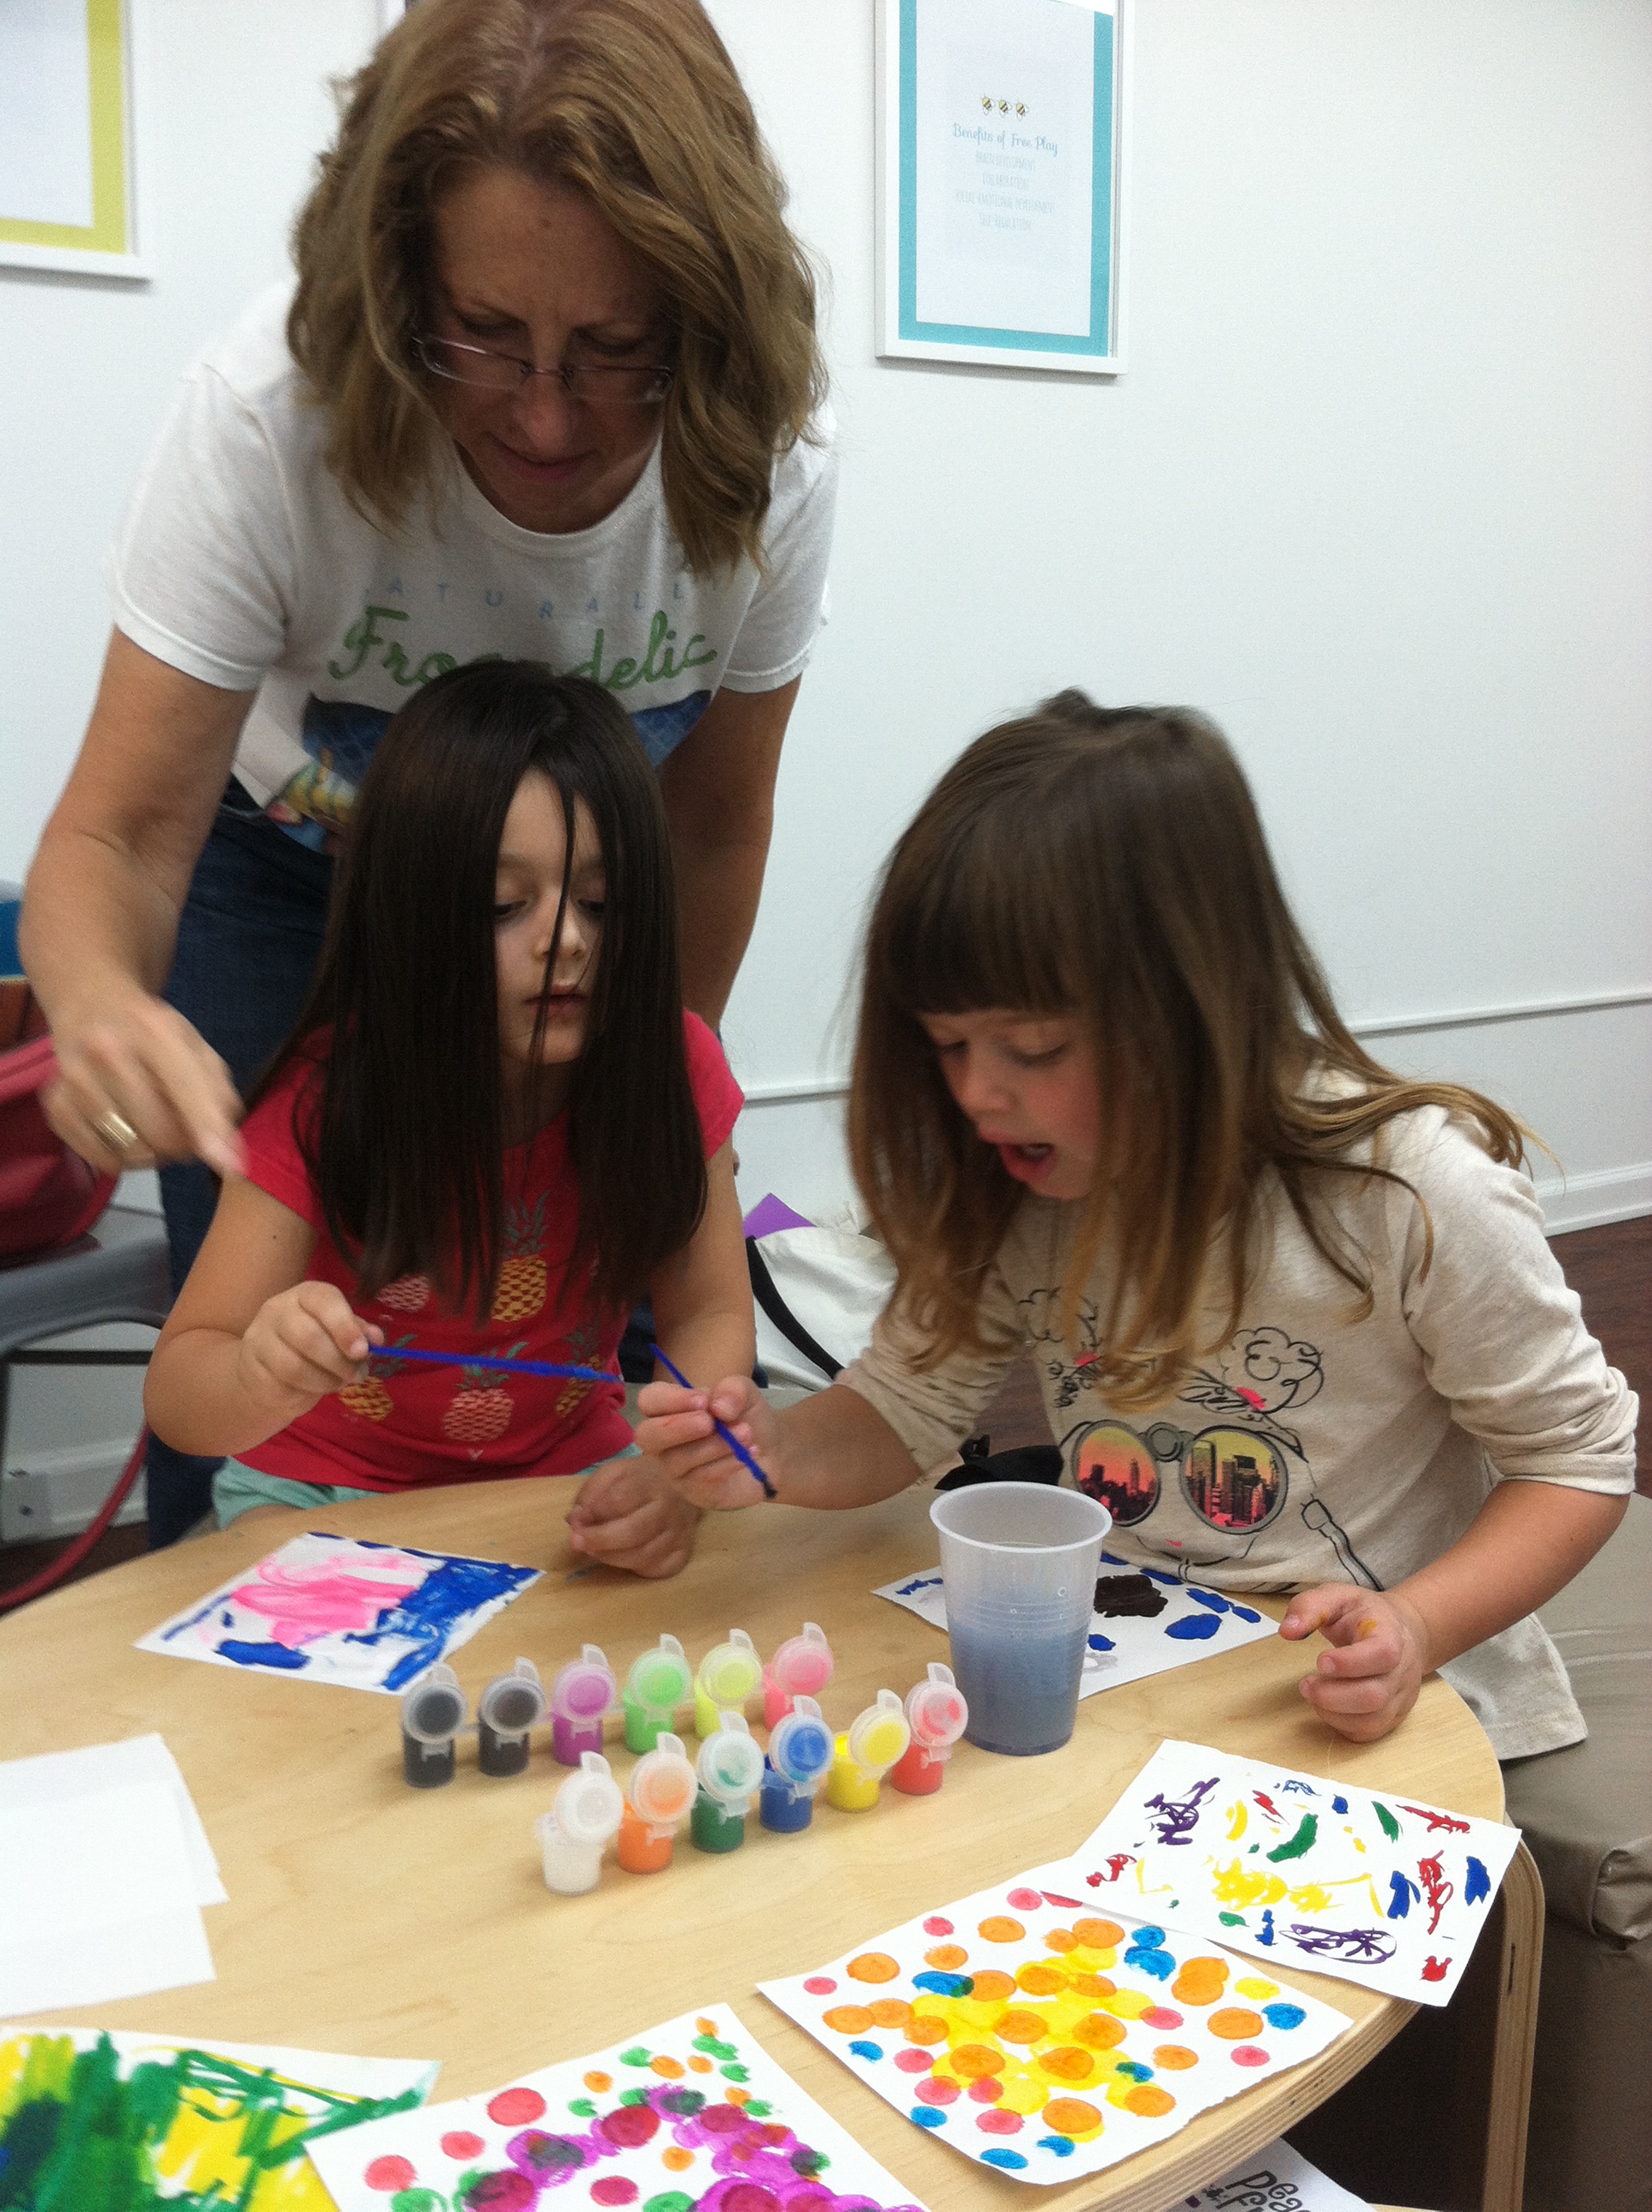 Susan teaches art to children 3-6 at Little Bee's Learning Studio